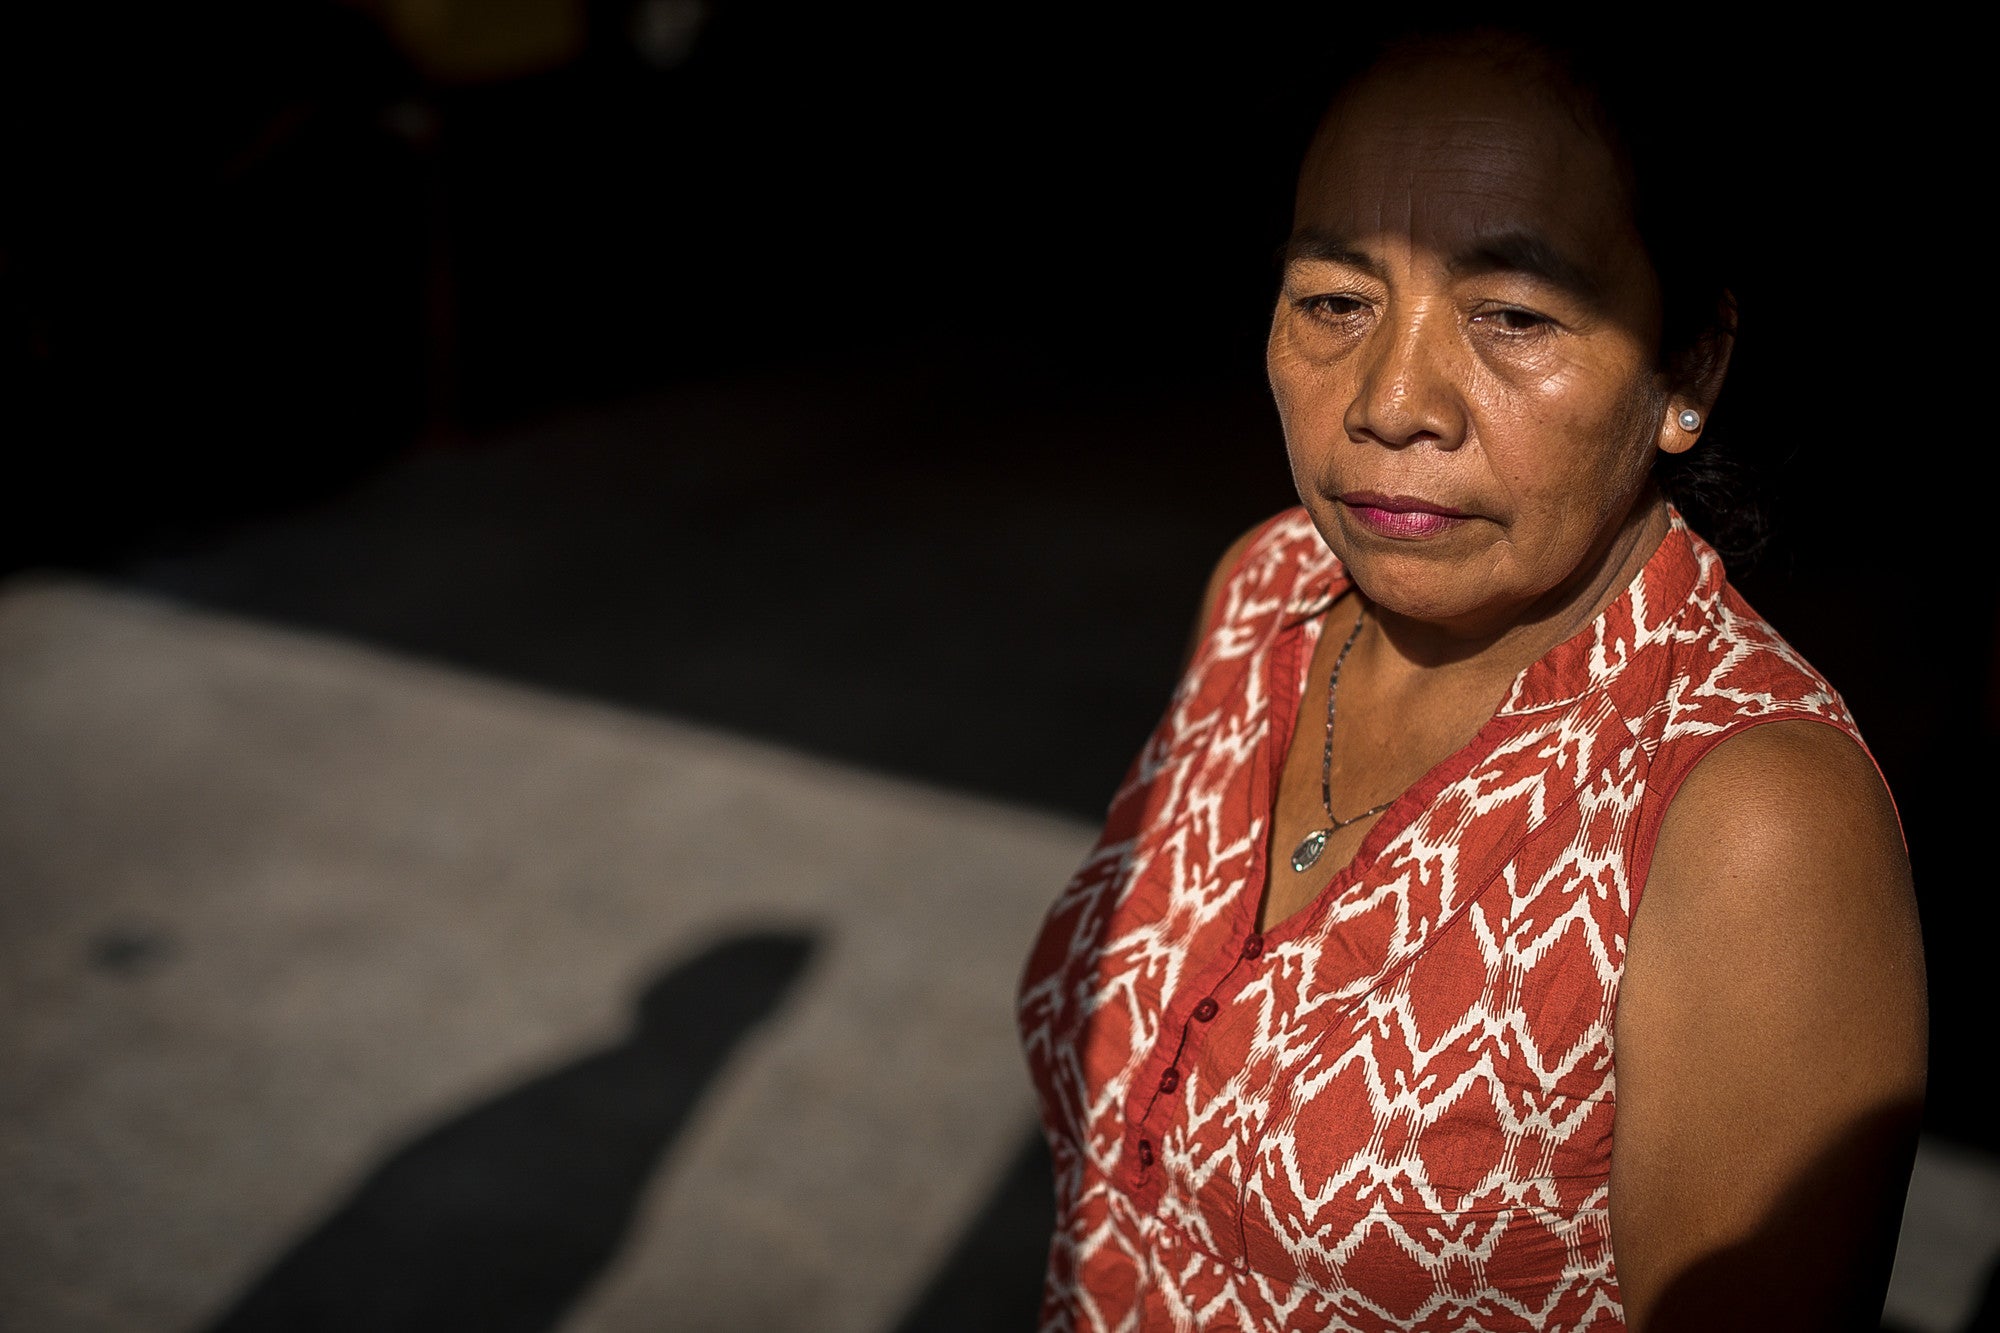 Maria Faustina was photographed in Guatemala City on April 13, 2018, as part of CARE' Domestic Workers Campaign. She looks forward in a shadowy room.